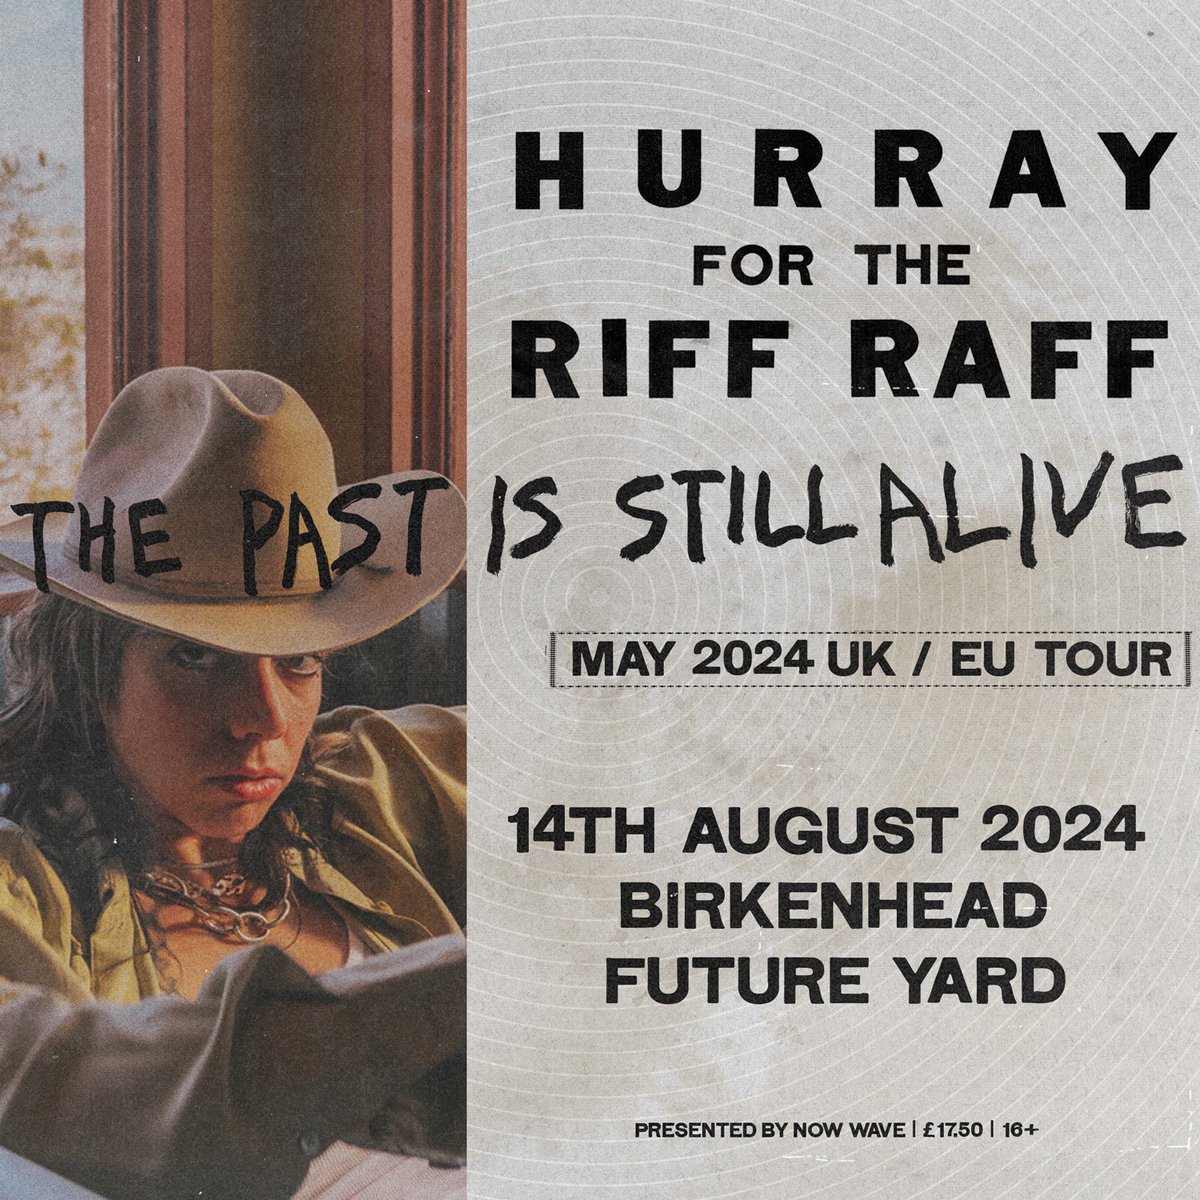 ON SALE NOW… @HFTRR perform at @future_yard, Birkenhead on August 14th! Tickets are available here -> seetickets.com/event/hurray-f…